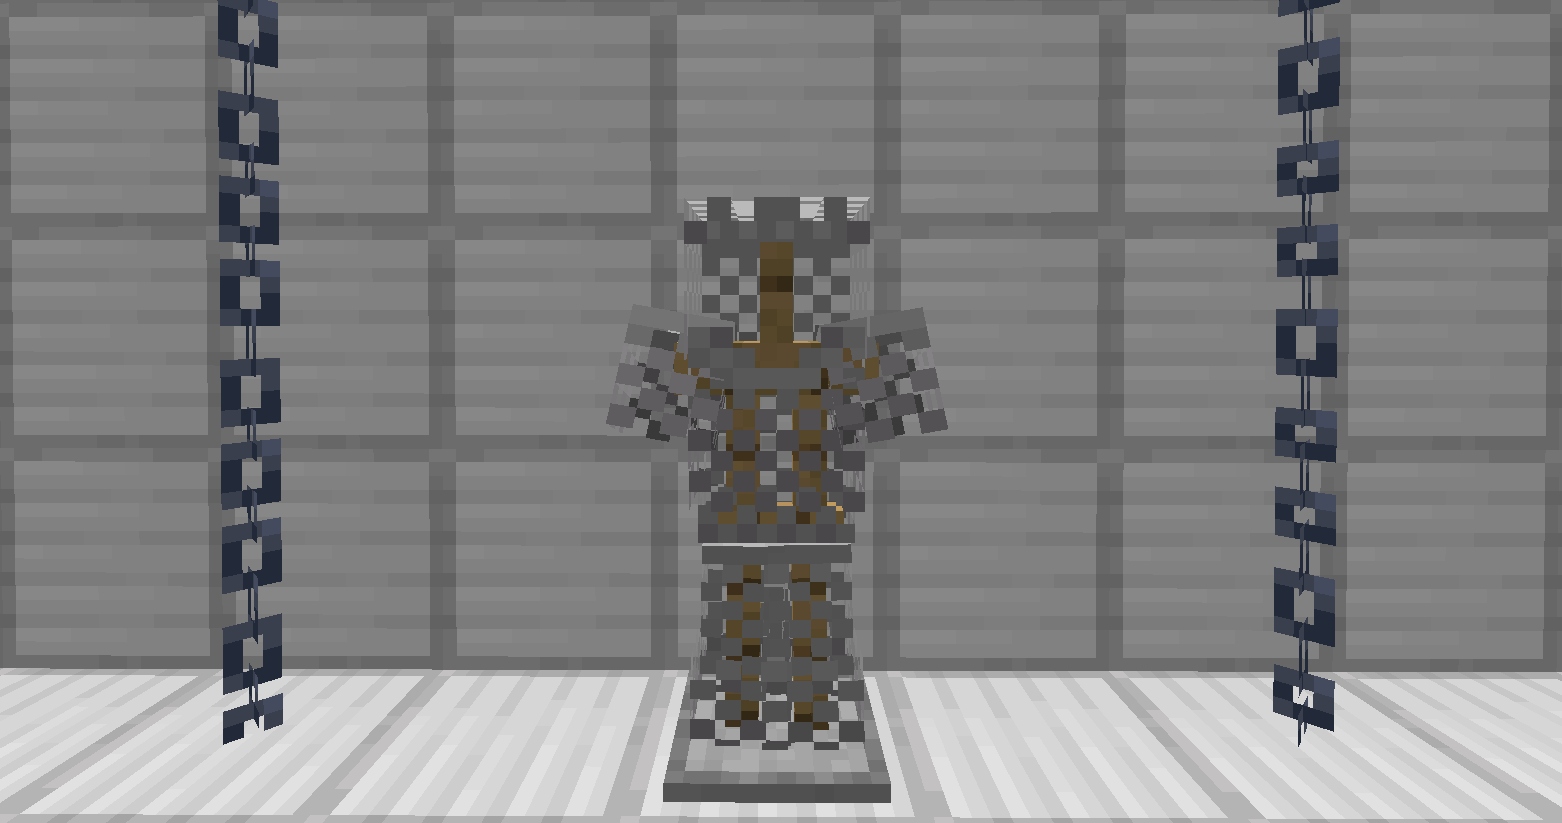 Chainmail armor in Minecraft: Everything players need to know